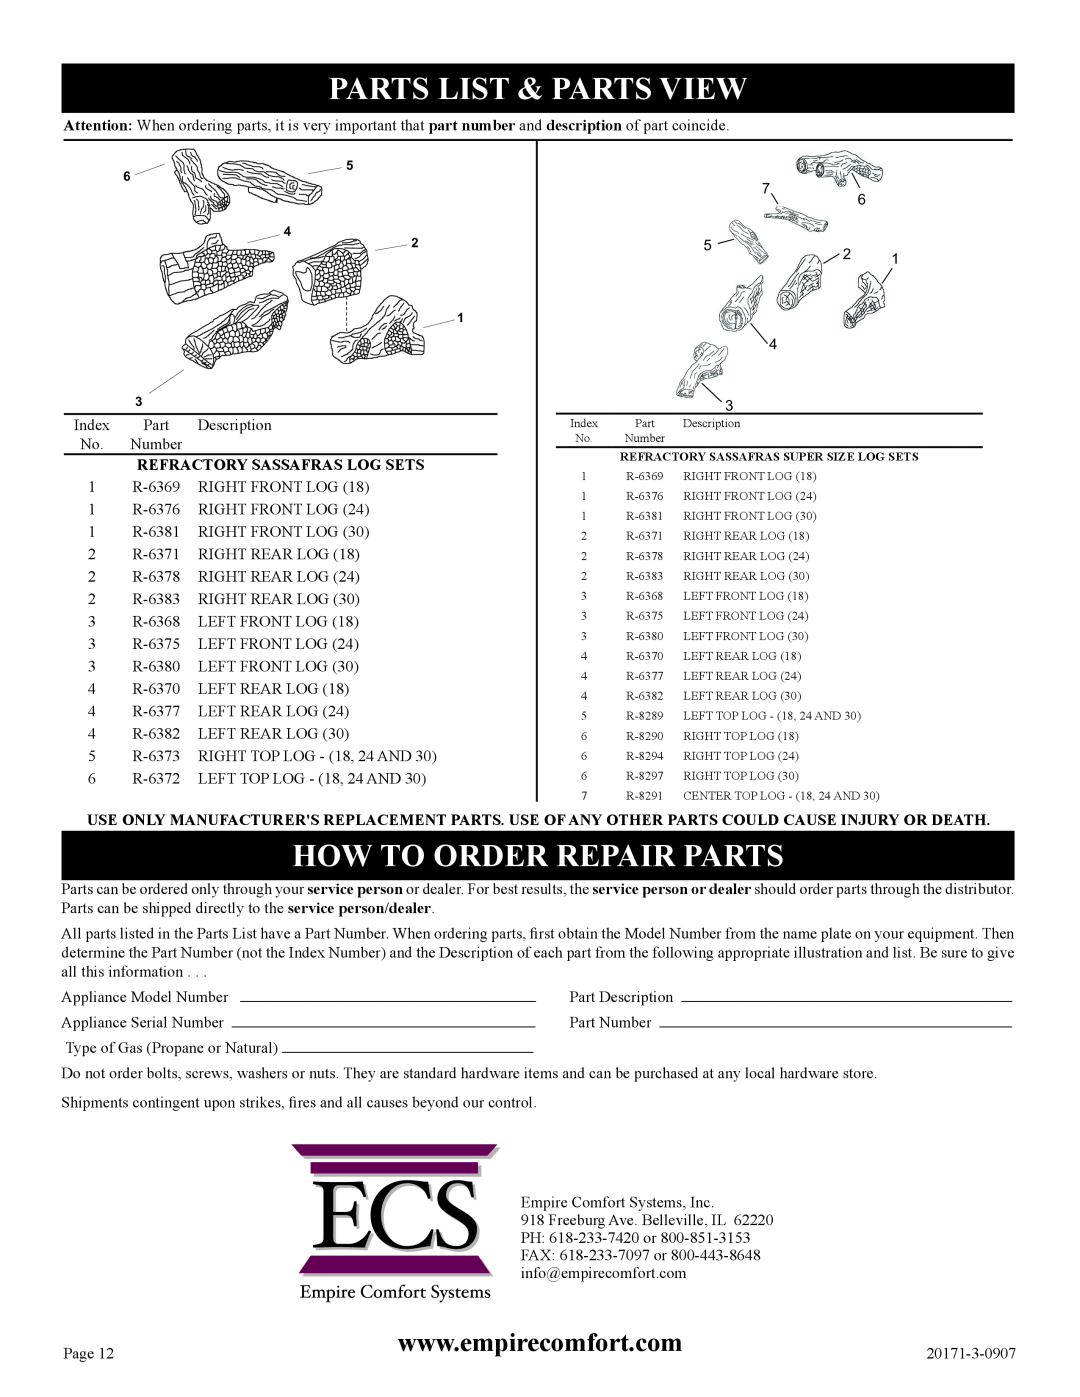 Empire Comfort Systems LS-30RS-1 Parts List & Parts View, How To Order Repair Parts, Refractory Sassafras Log Sets 